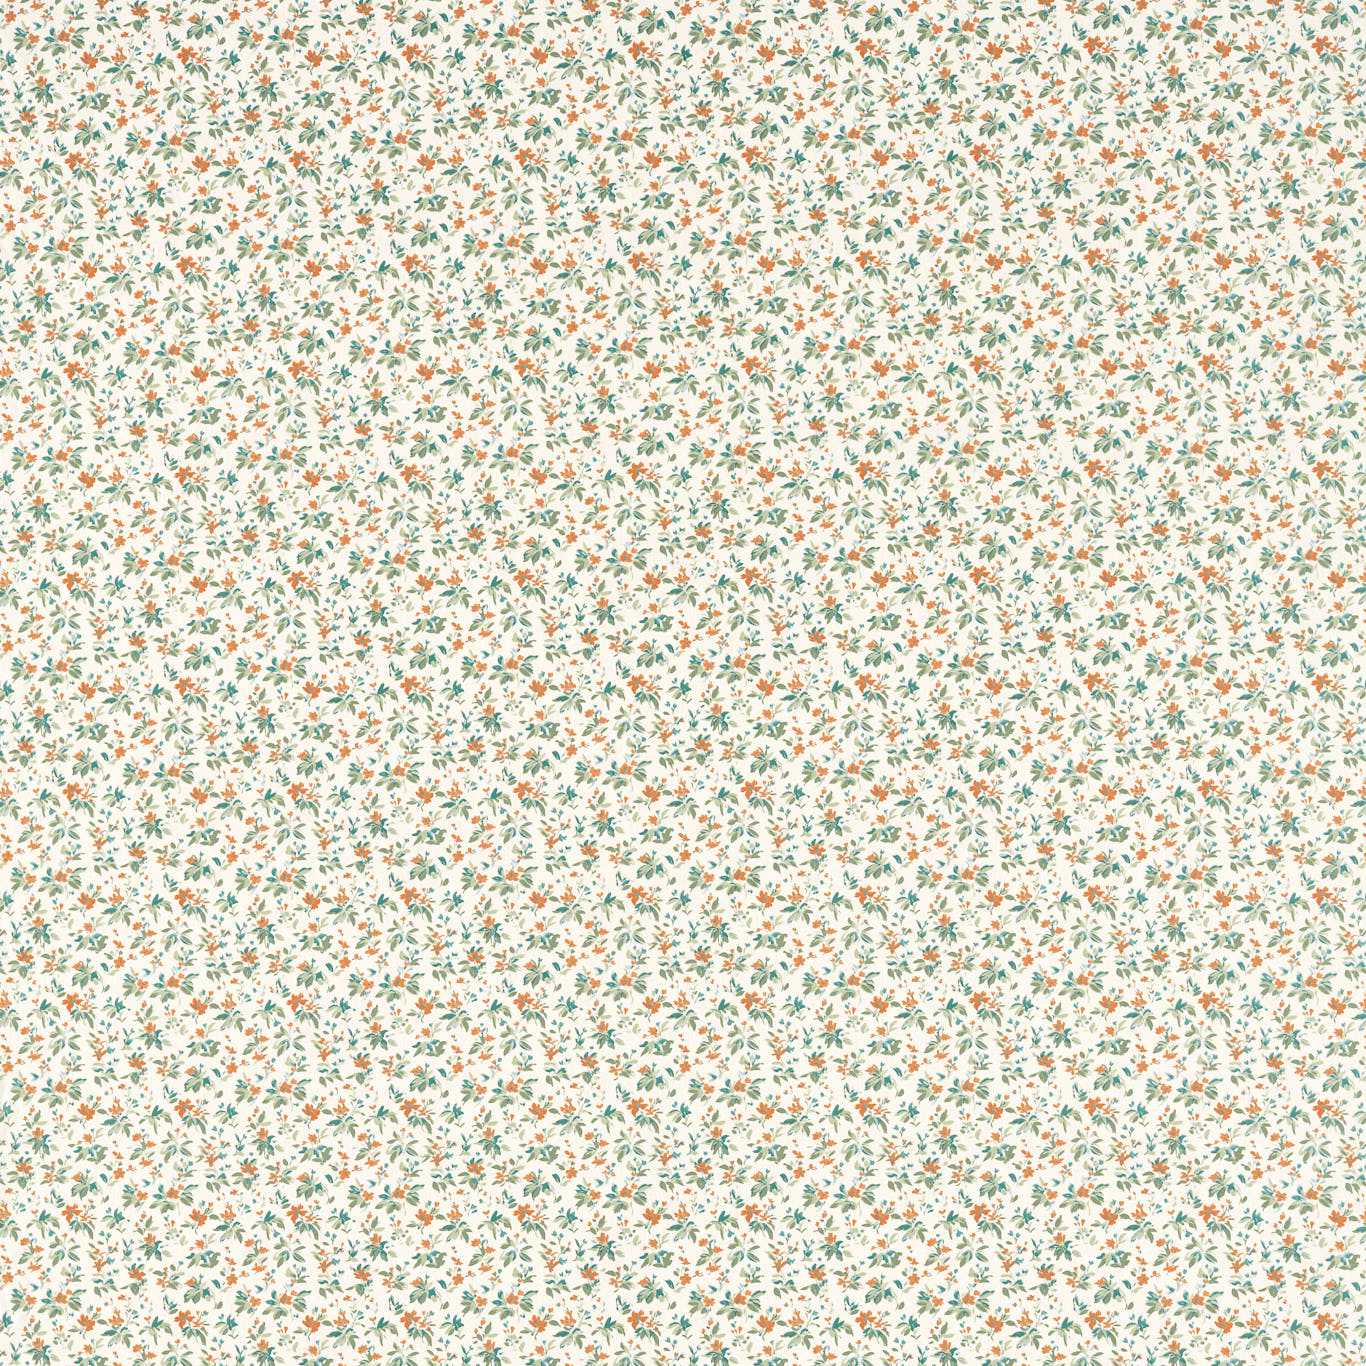 Thetford Teal/Spice Fabric by CNC